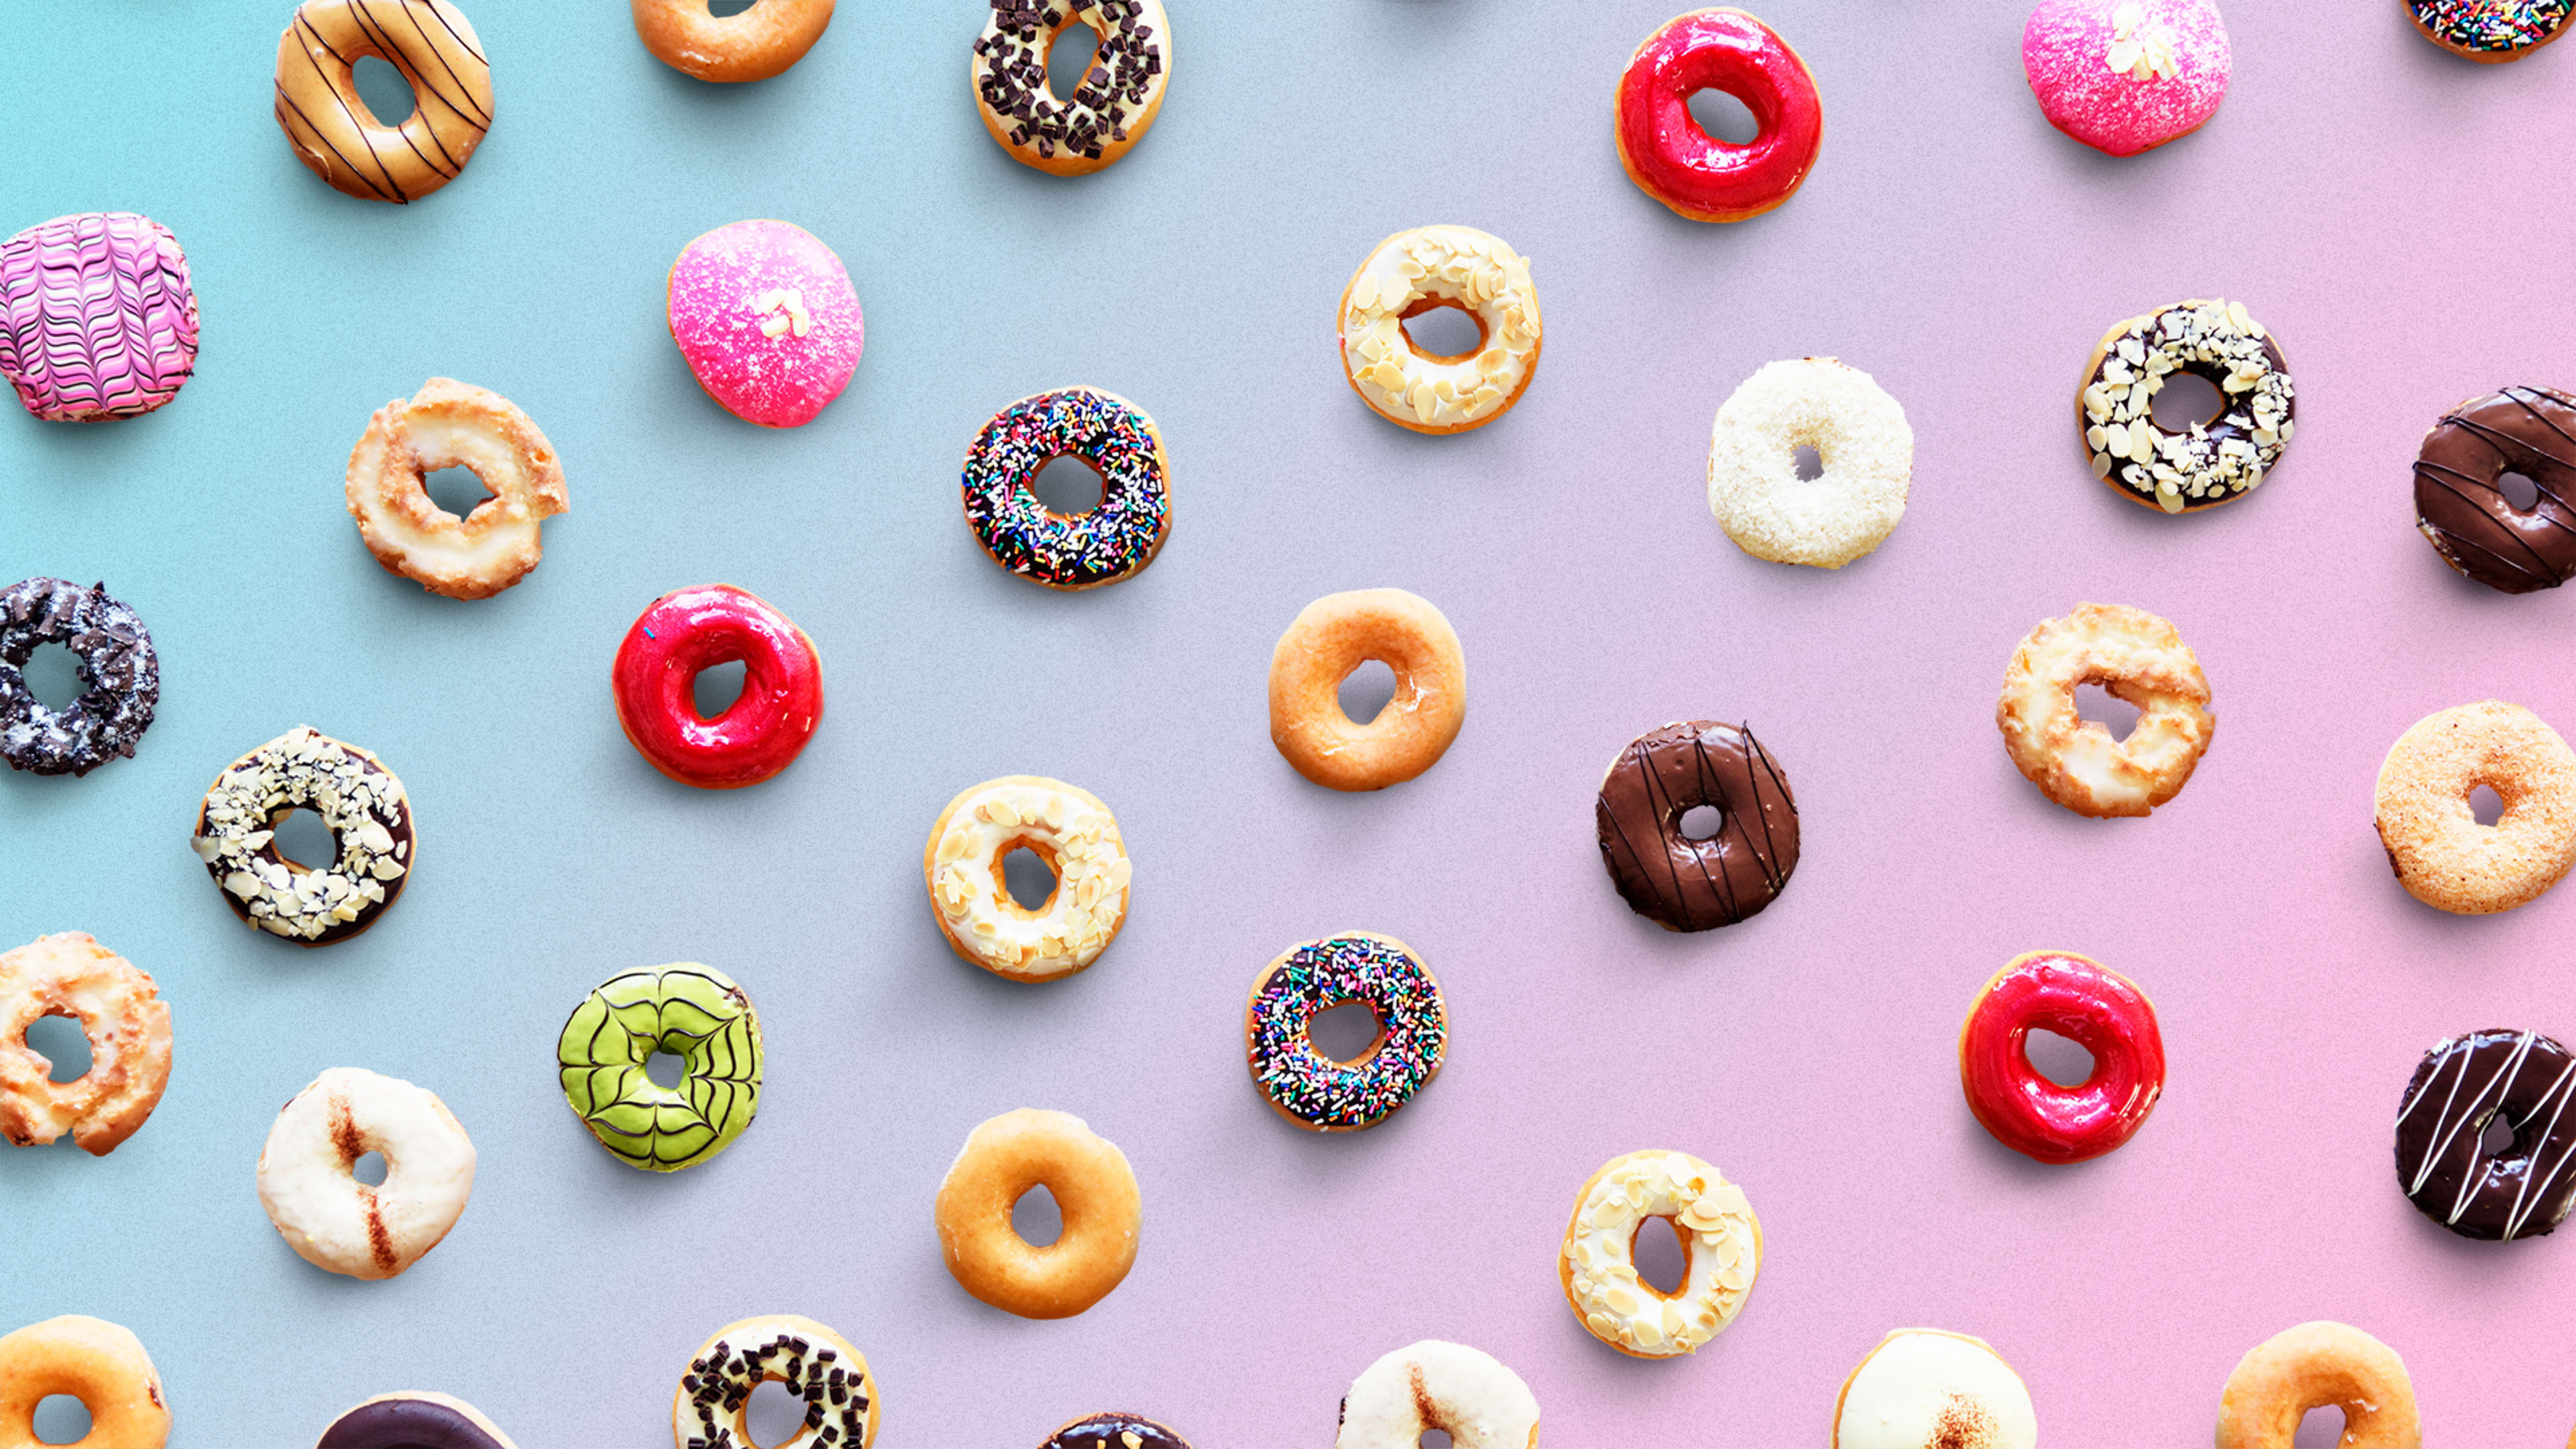 National Doughnut Day freebies and deals abound. Here are some of the best